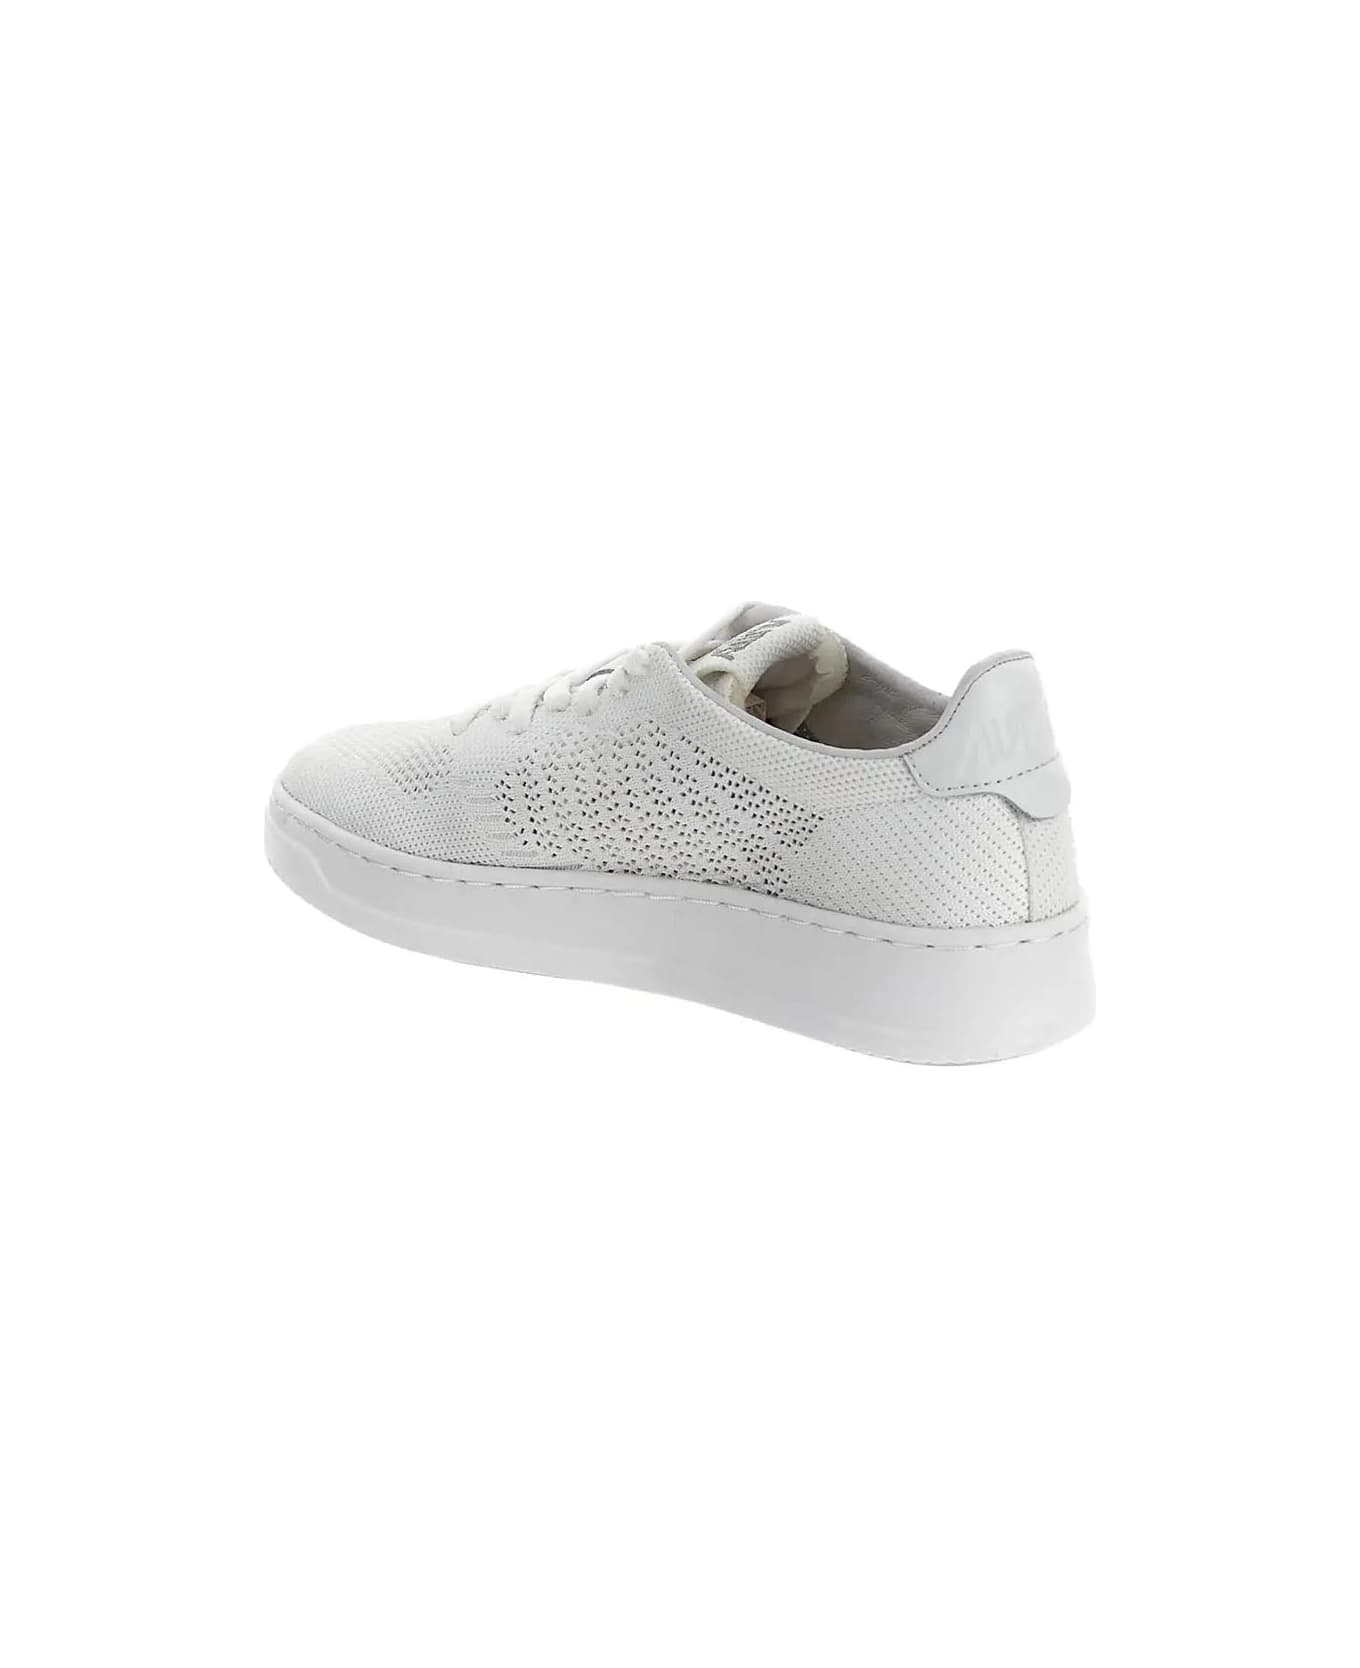 Autry Easeknit Low Sneakers - White